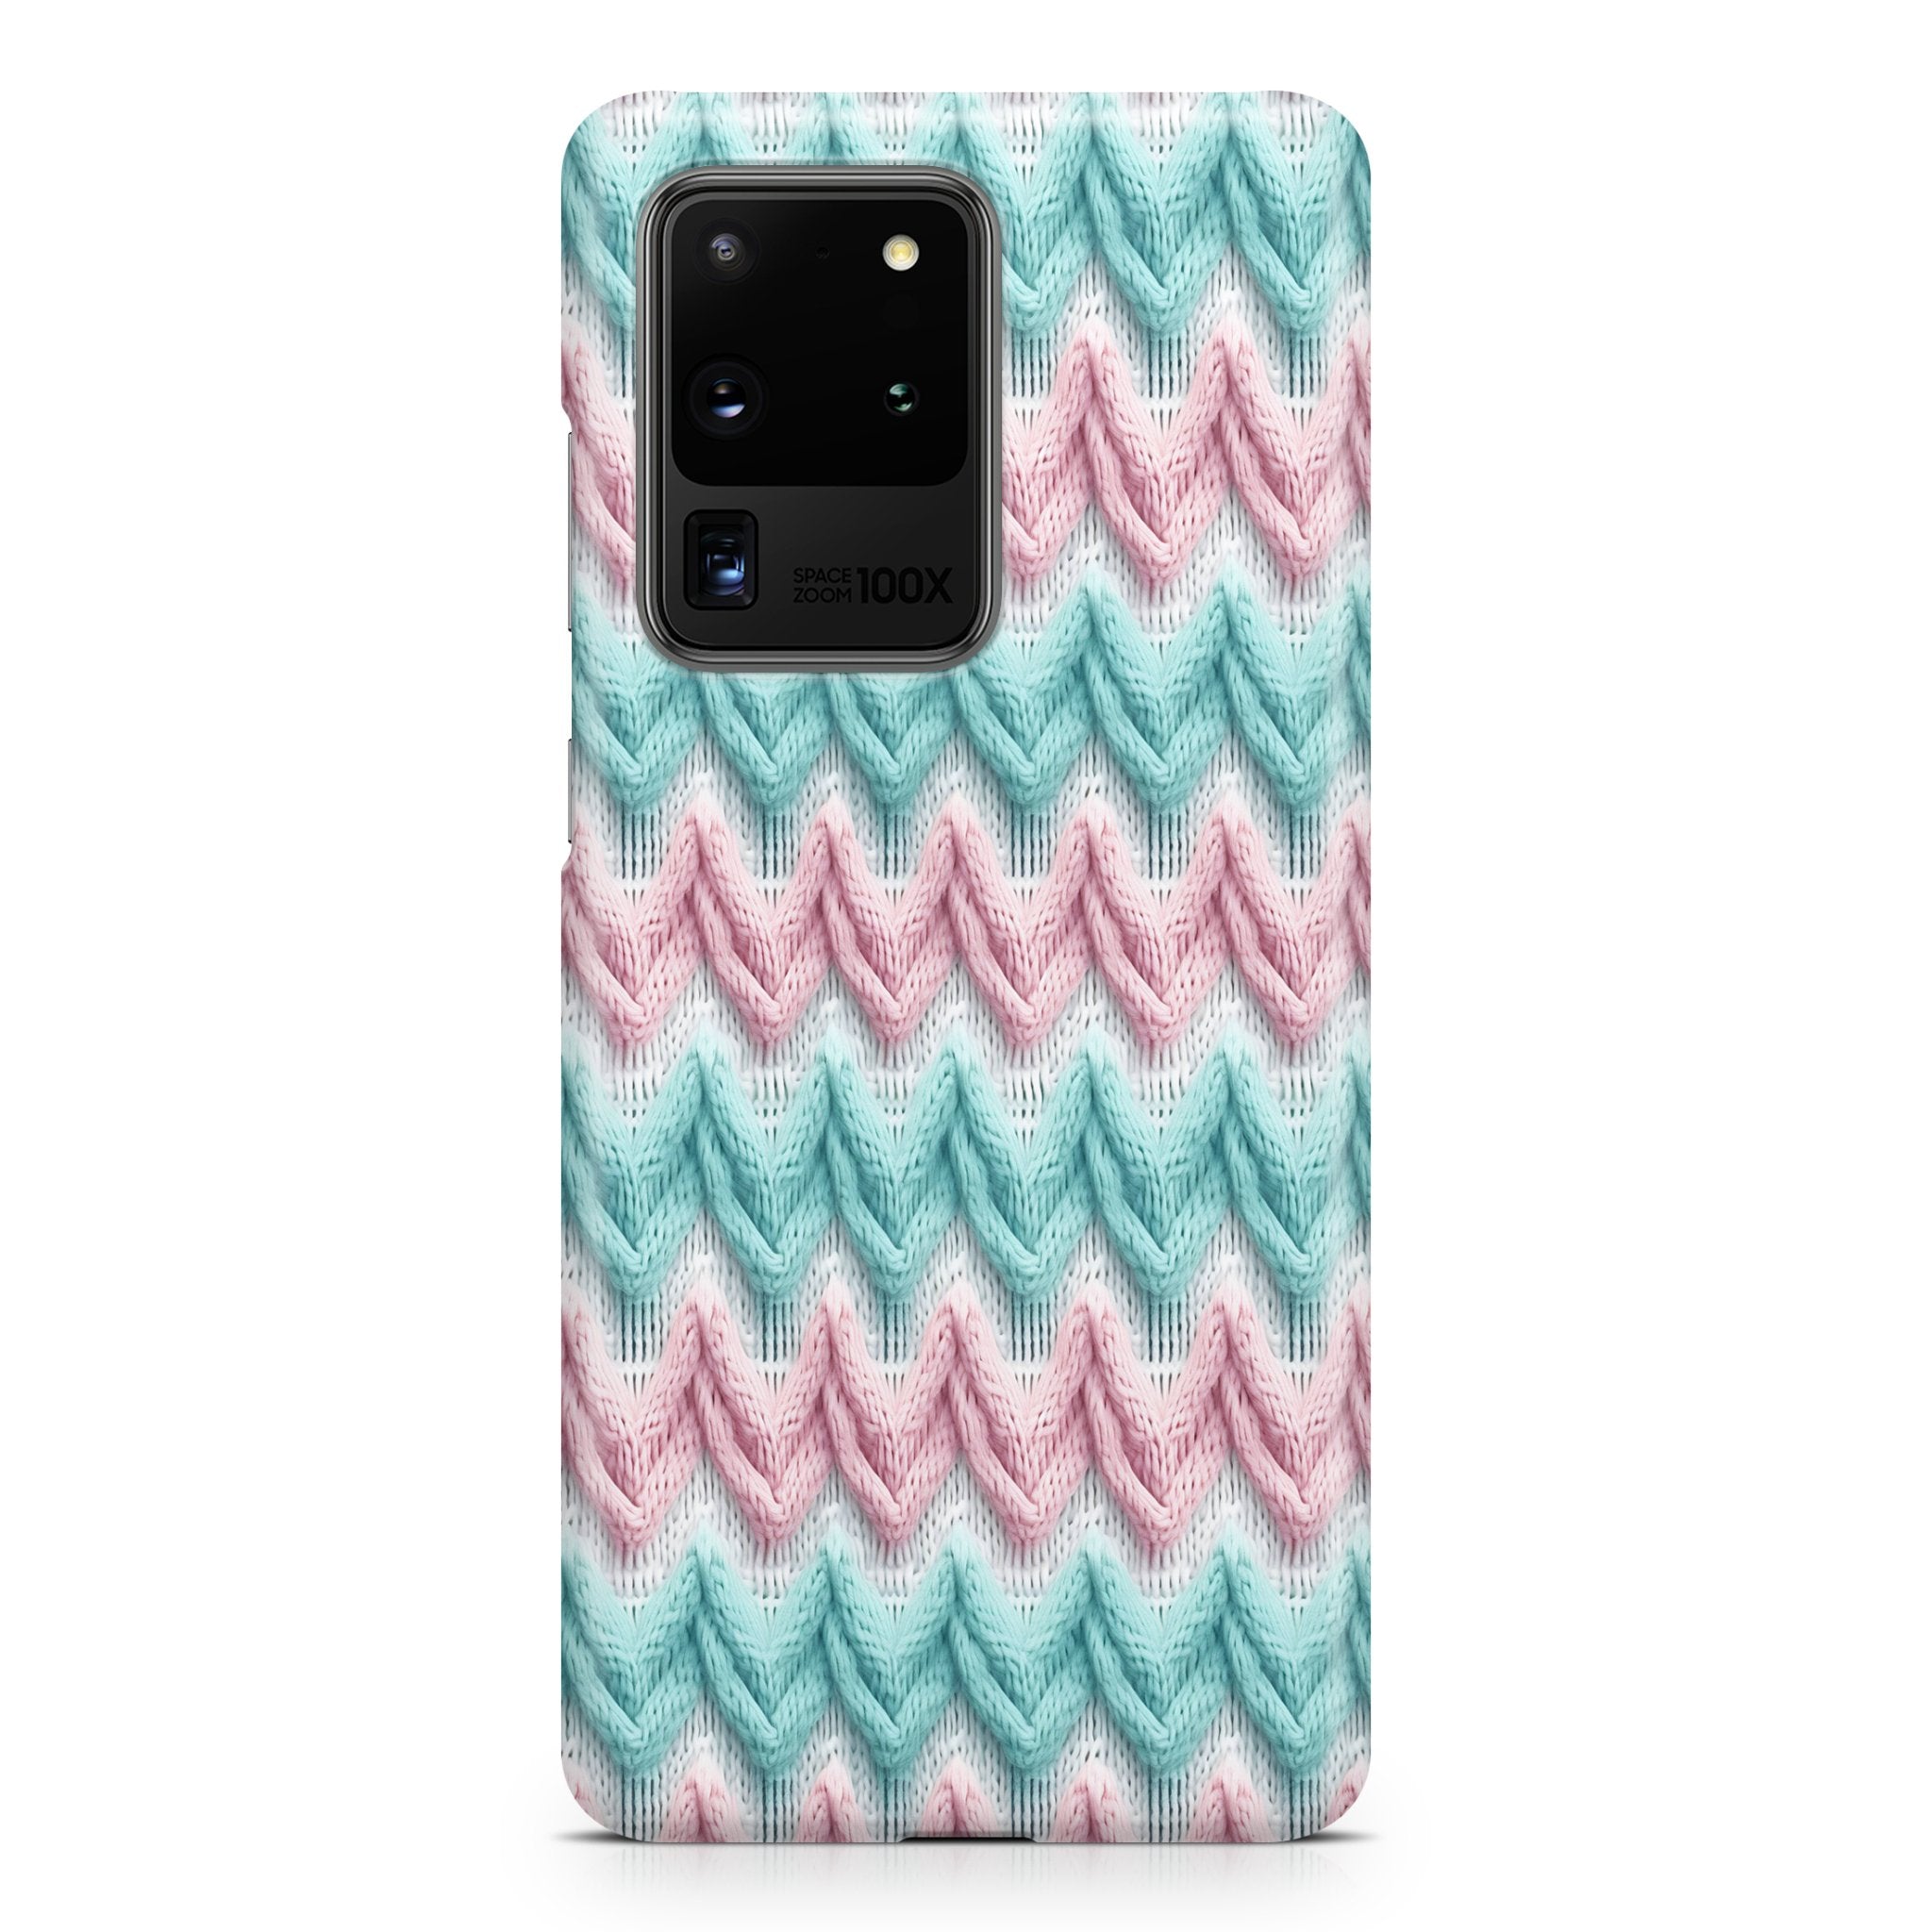 Dreamy Hues - Samsung phone case designs by CaseSwagger